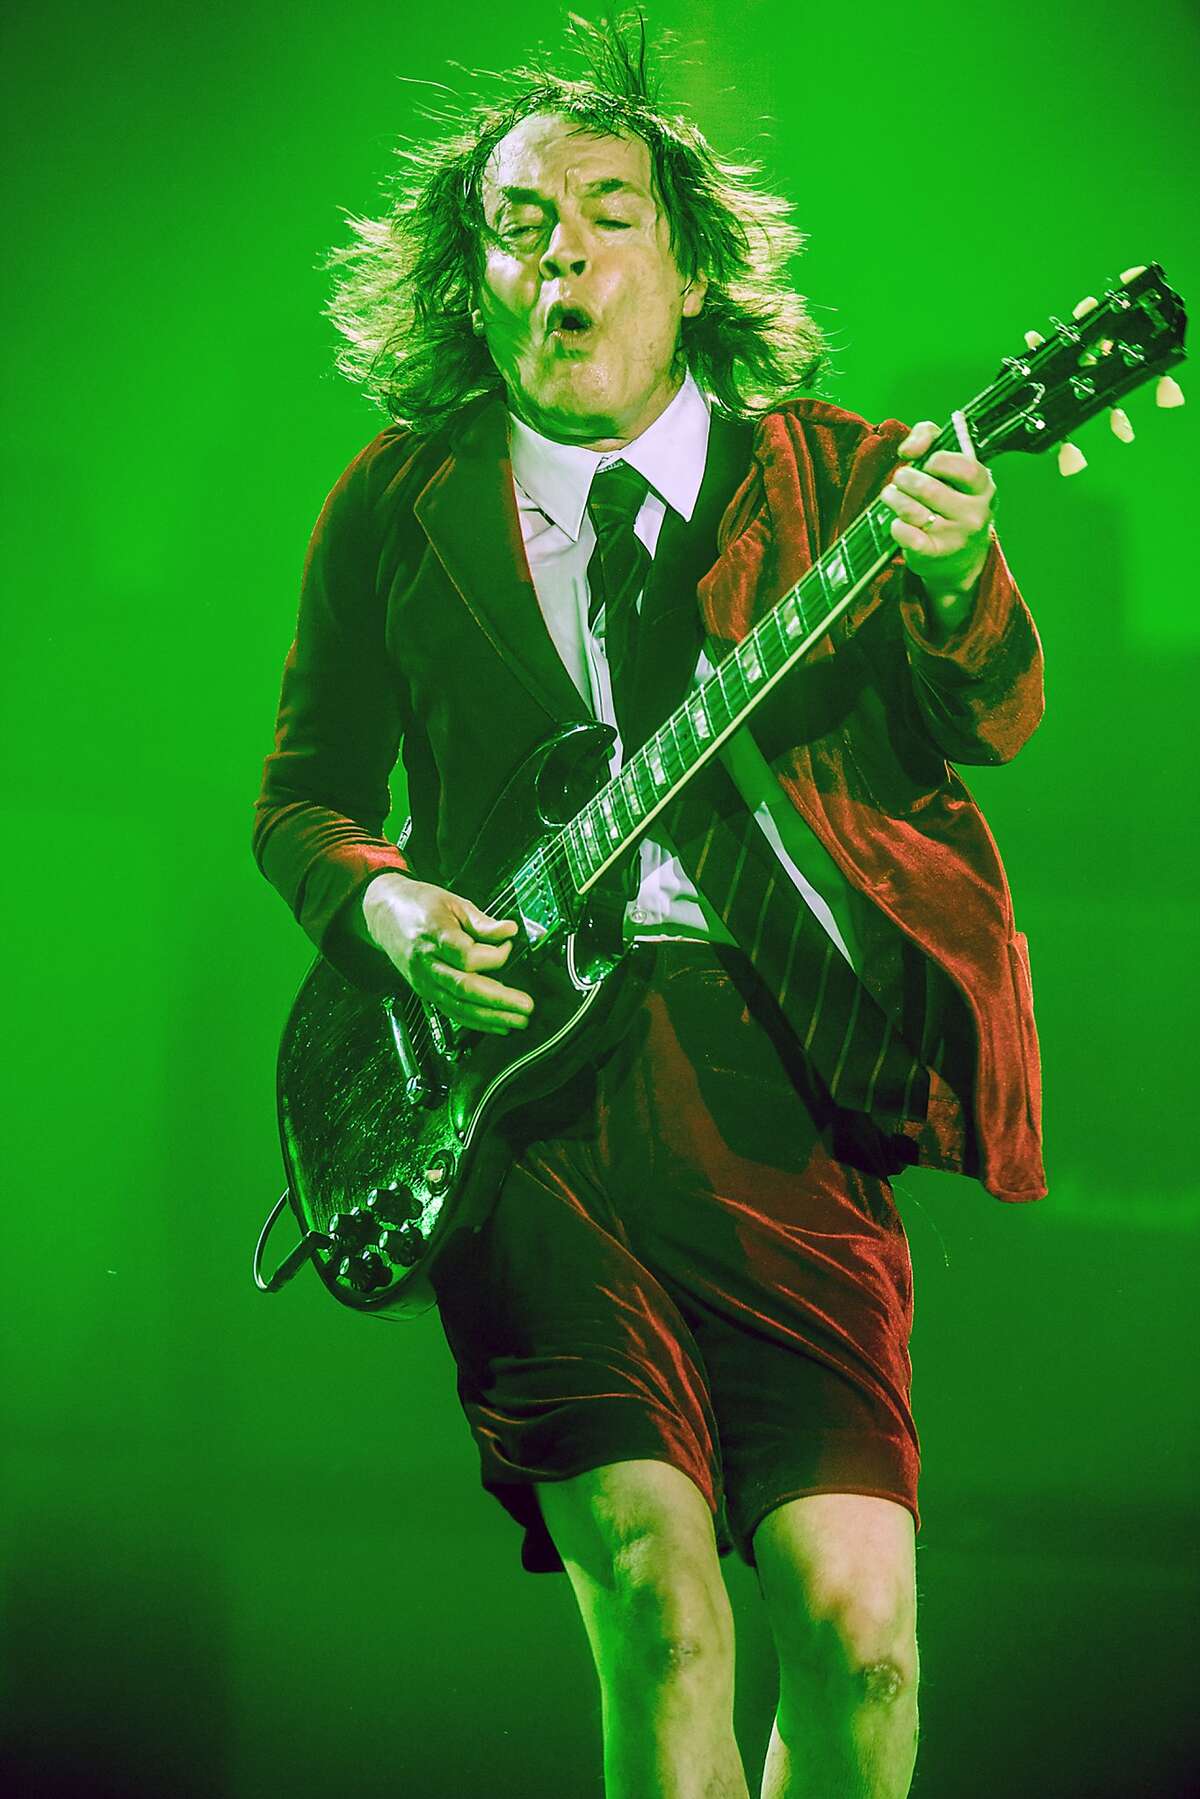 IMAGE DISTRIBUTED FOR PHILIPS - In this image released on Thursday, Aug. 20, 2015, lead-guitarist Angus Young of Australian band AC/DC performs during their 'Rock or Bust' tour. The band kick off the North American leg of the tour on Saturday in Foxborough, Massachusetts with a spectacular light show using technology from Philips, the global leader in lighting. The group's lighting designers Patrick Woodroffe and Cosmo Wilson pulled out all the stops to create a spectacle that would enthrall the 60,000-strong crowds attending AC/DC's 55 tour dates. The lighting provides more concentrated beams and generates less heat on stage which is welcomed by the performers. The cutting-edge technology allows the designers to create a multitude of lighting effects to complement every note of the band's hit-laden 150-minute set. Images and press release available at http://www.apassignments.com/multimedia-newsroom#philips-takes-acdc-back-out-of-the-black-with-explosive-light-show. (Ralph Larmann/Philips via AP Images)